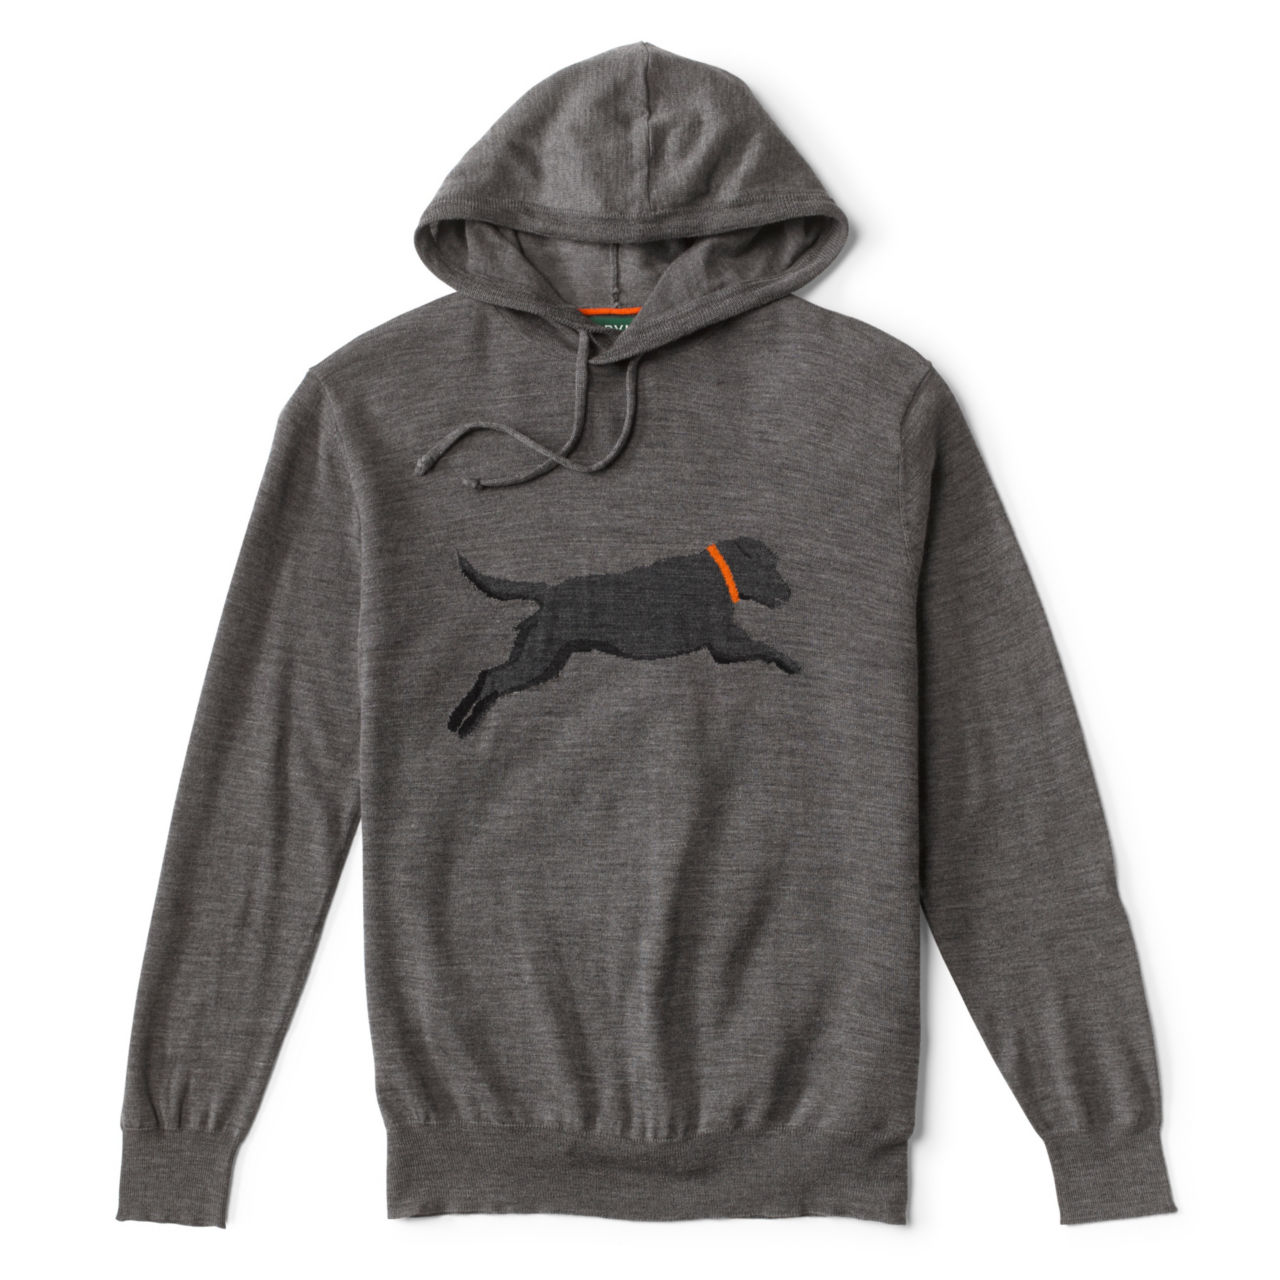 Men's Trout Merino Wool Hoodie Sweater | Charcoal with Dog | Size Medium | Orvis